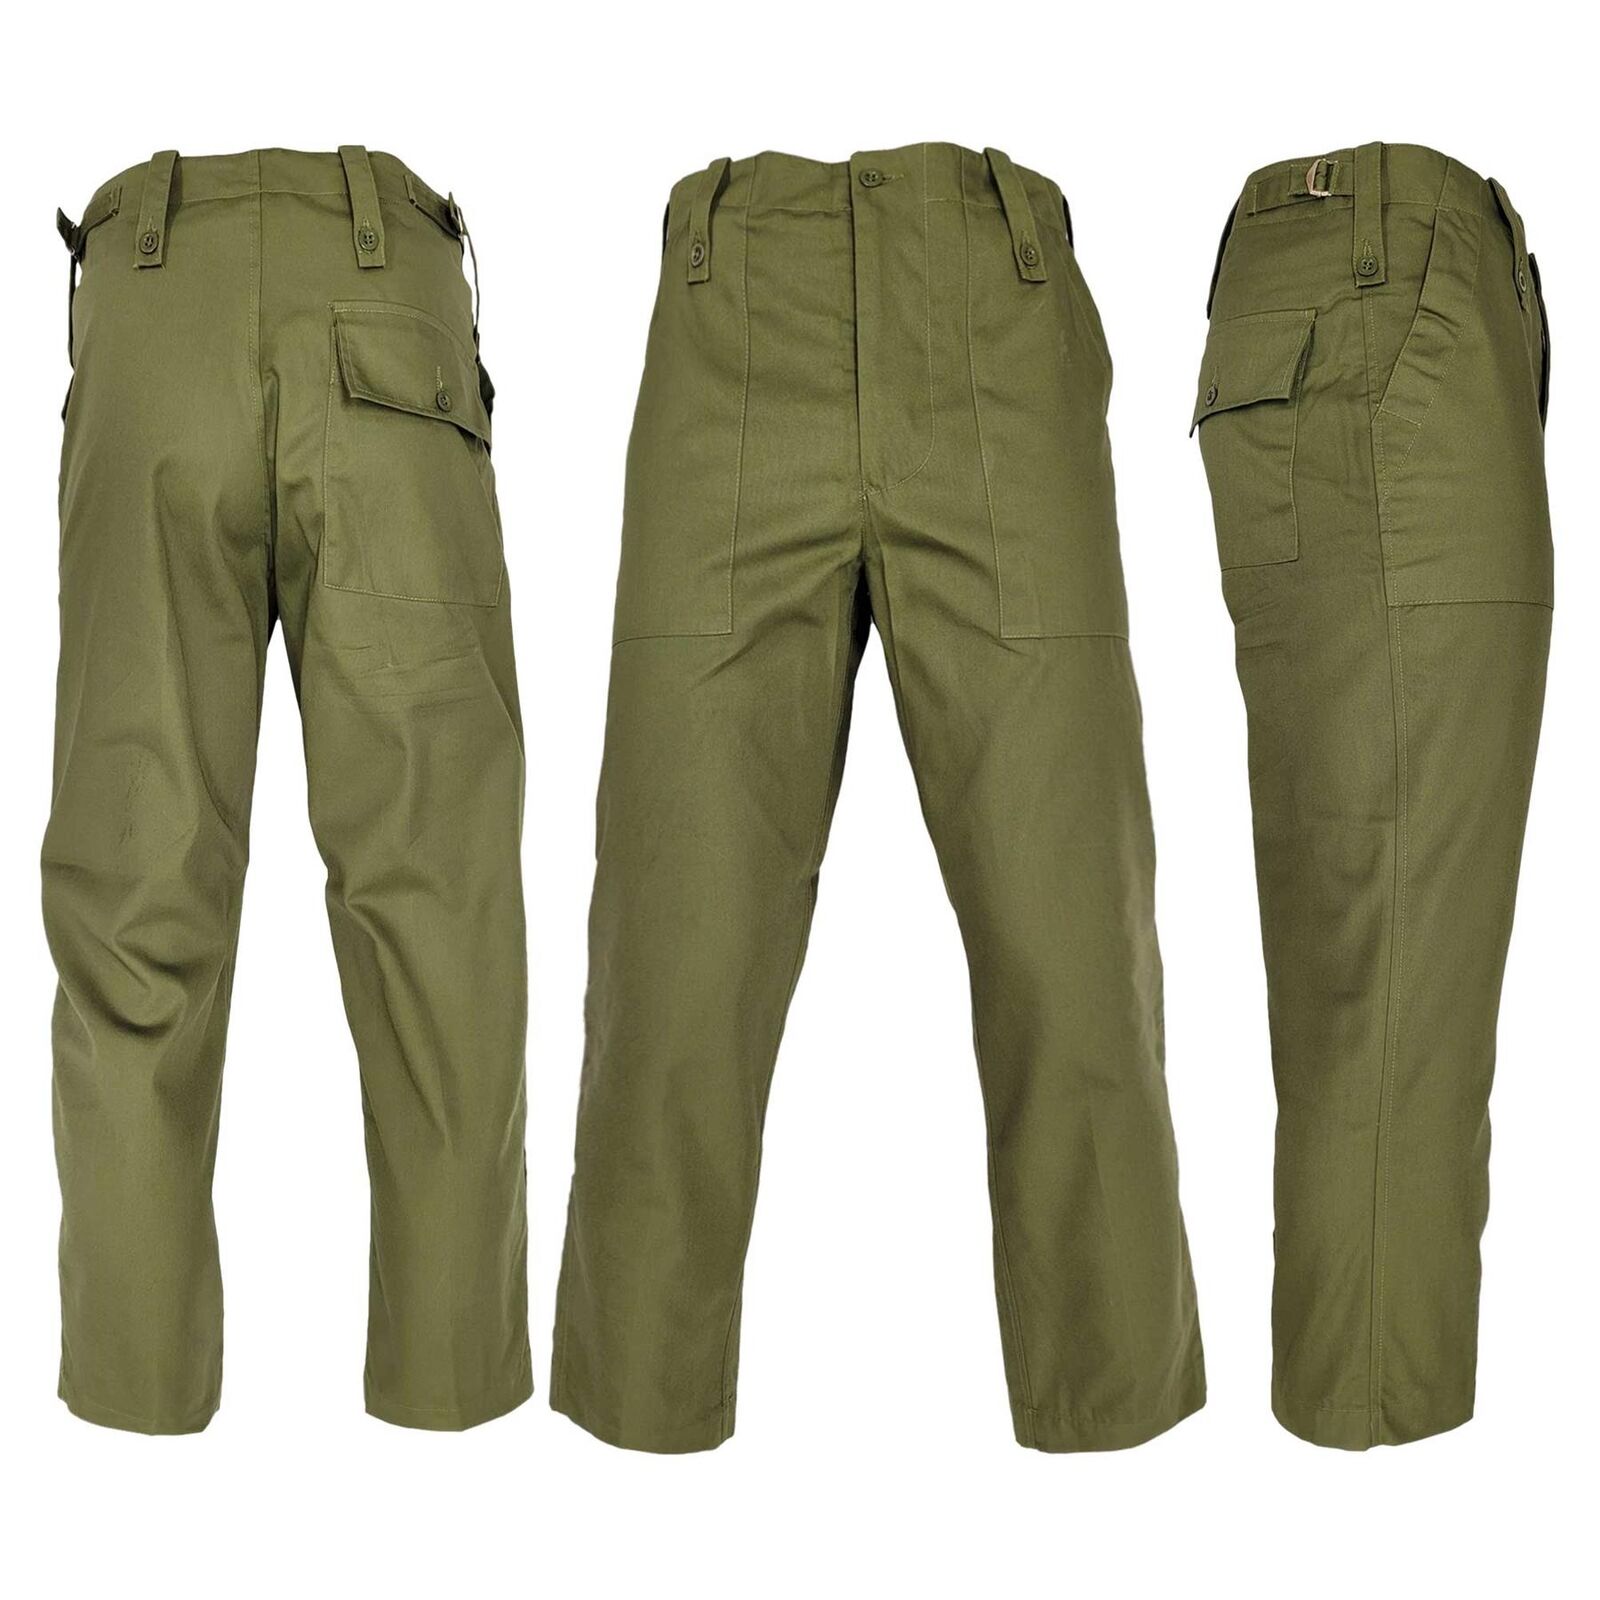 Original British Army Lightweight Trousers General Service Work Cargo Pant Olive